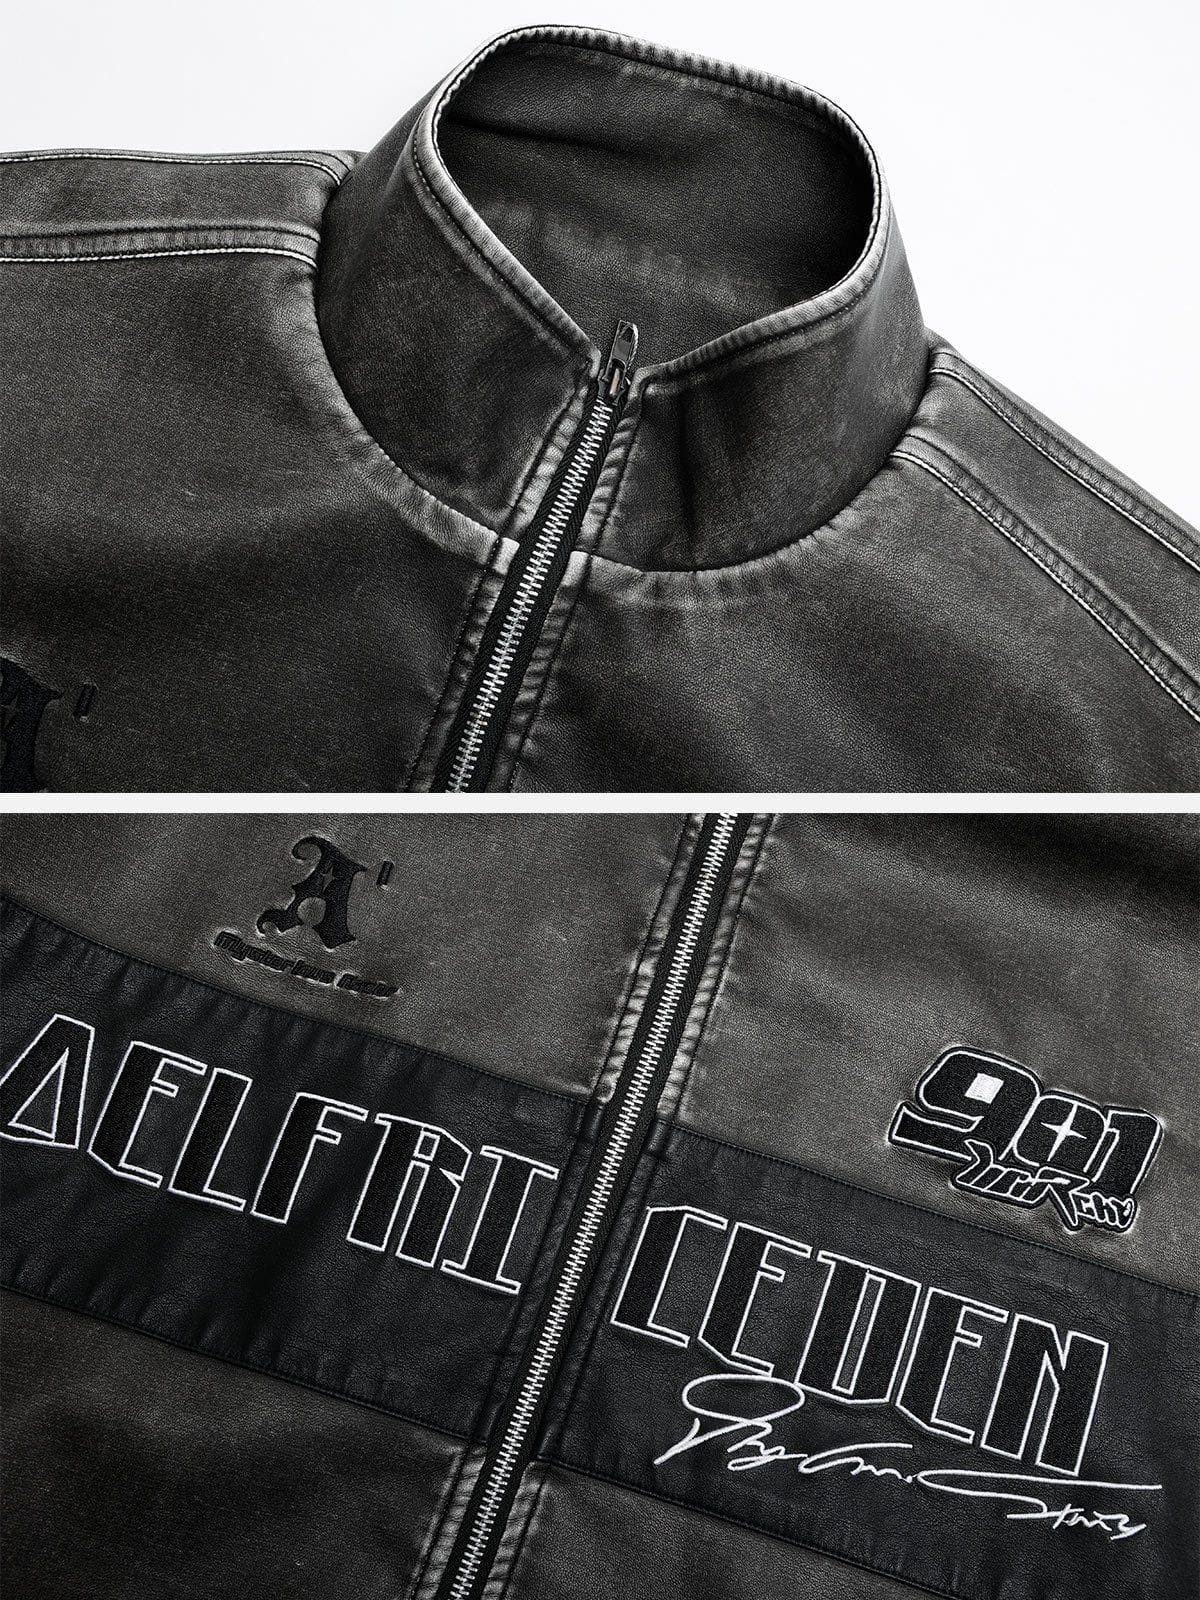 Aelfric Eden Embroidery Washed Racing Jacket